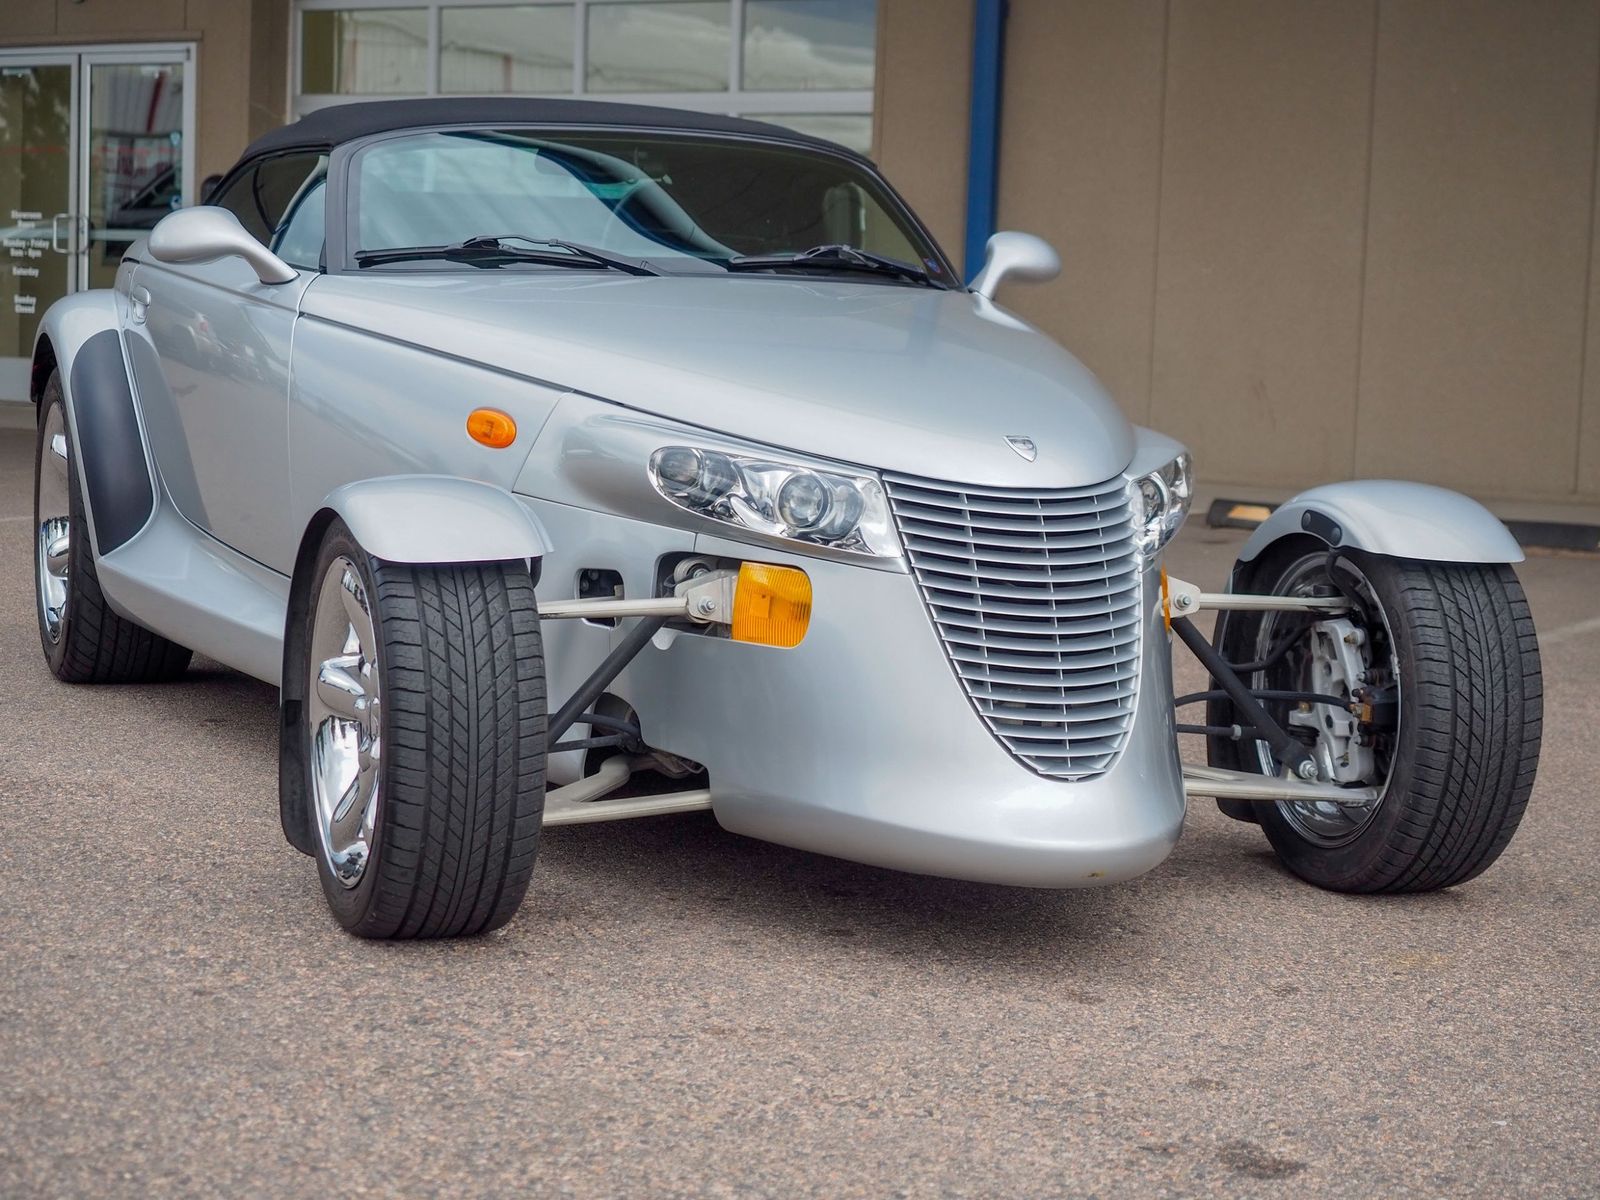 2000 Plymouth Prowler 6